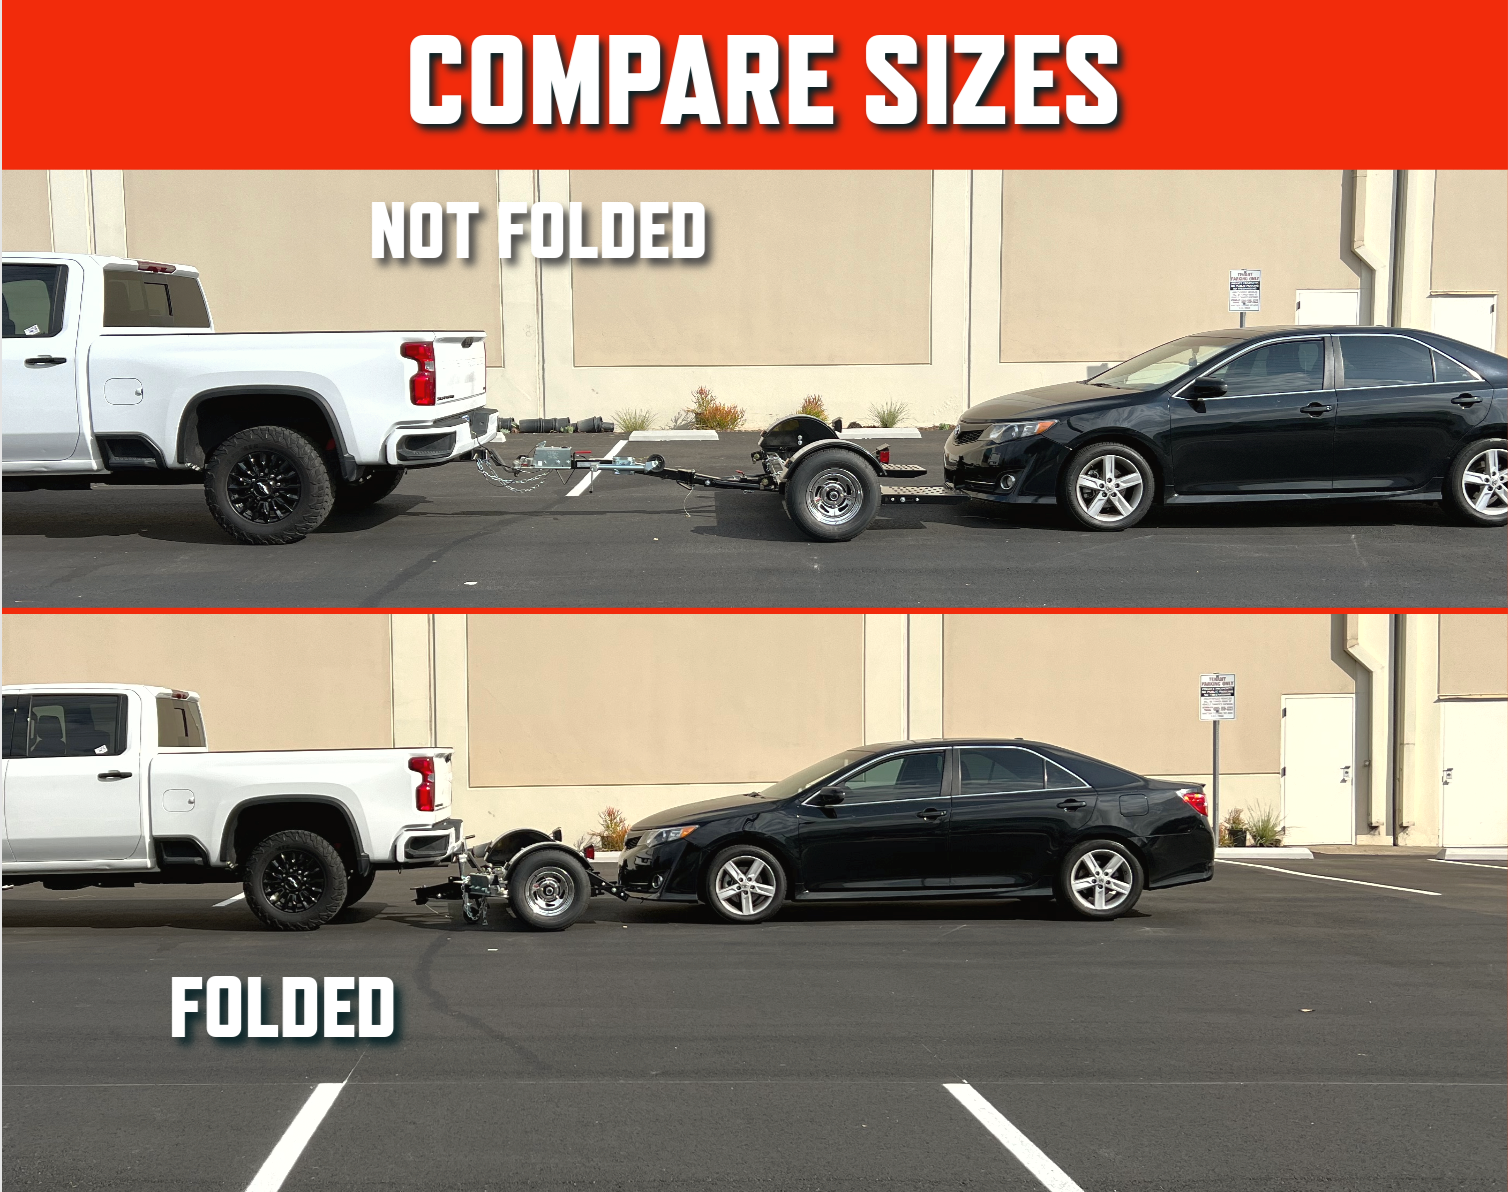 Flat towing Vs Car Tow Dolly - Majority of the cars ca not be flat towed therefore this is a better solution.